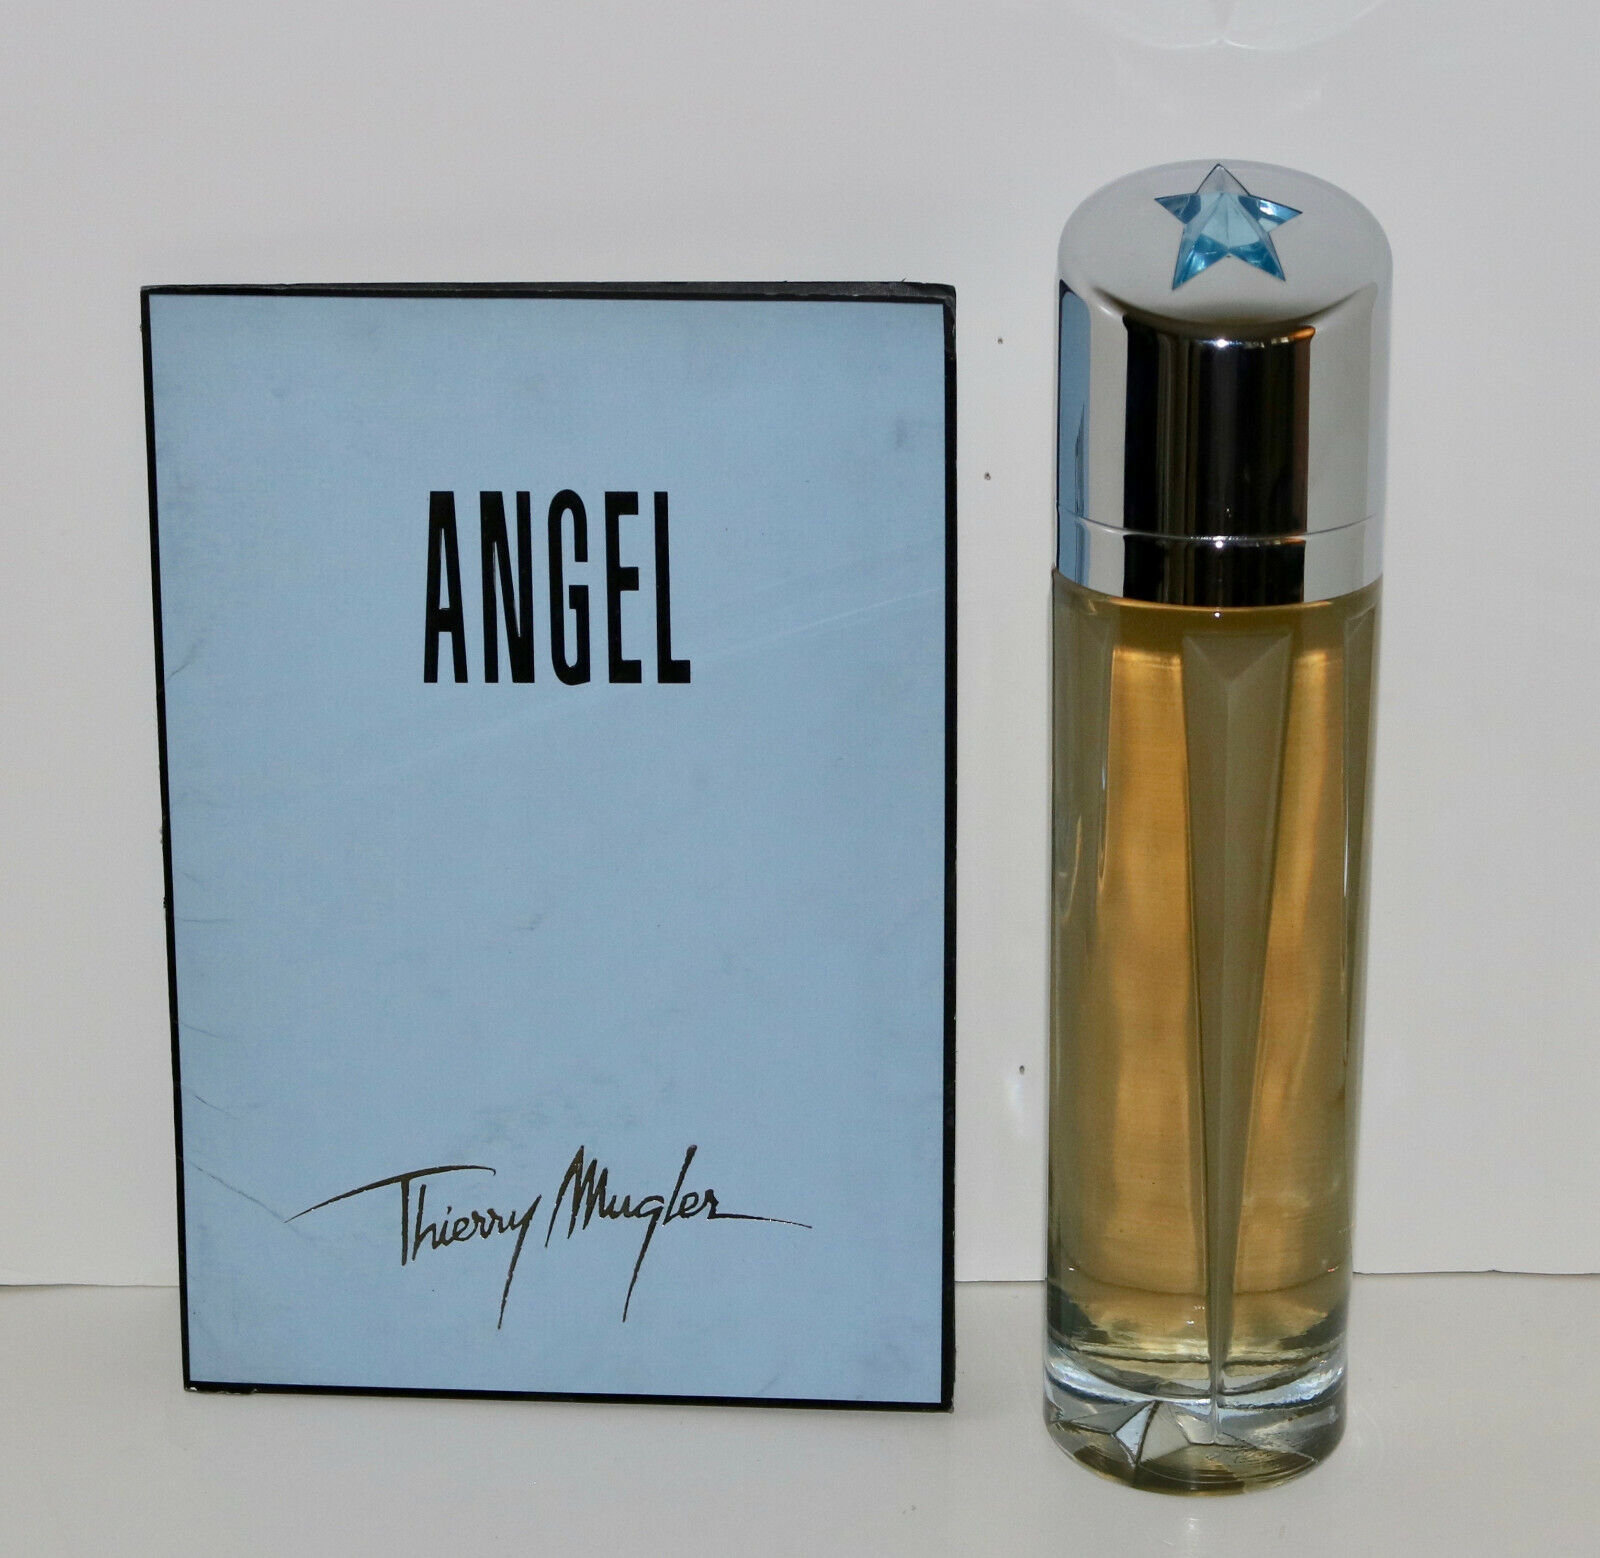 Thierry Mugler fragrance press kit and huge factice Dummy display bottle